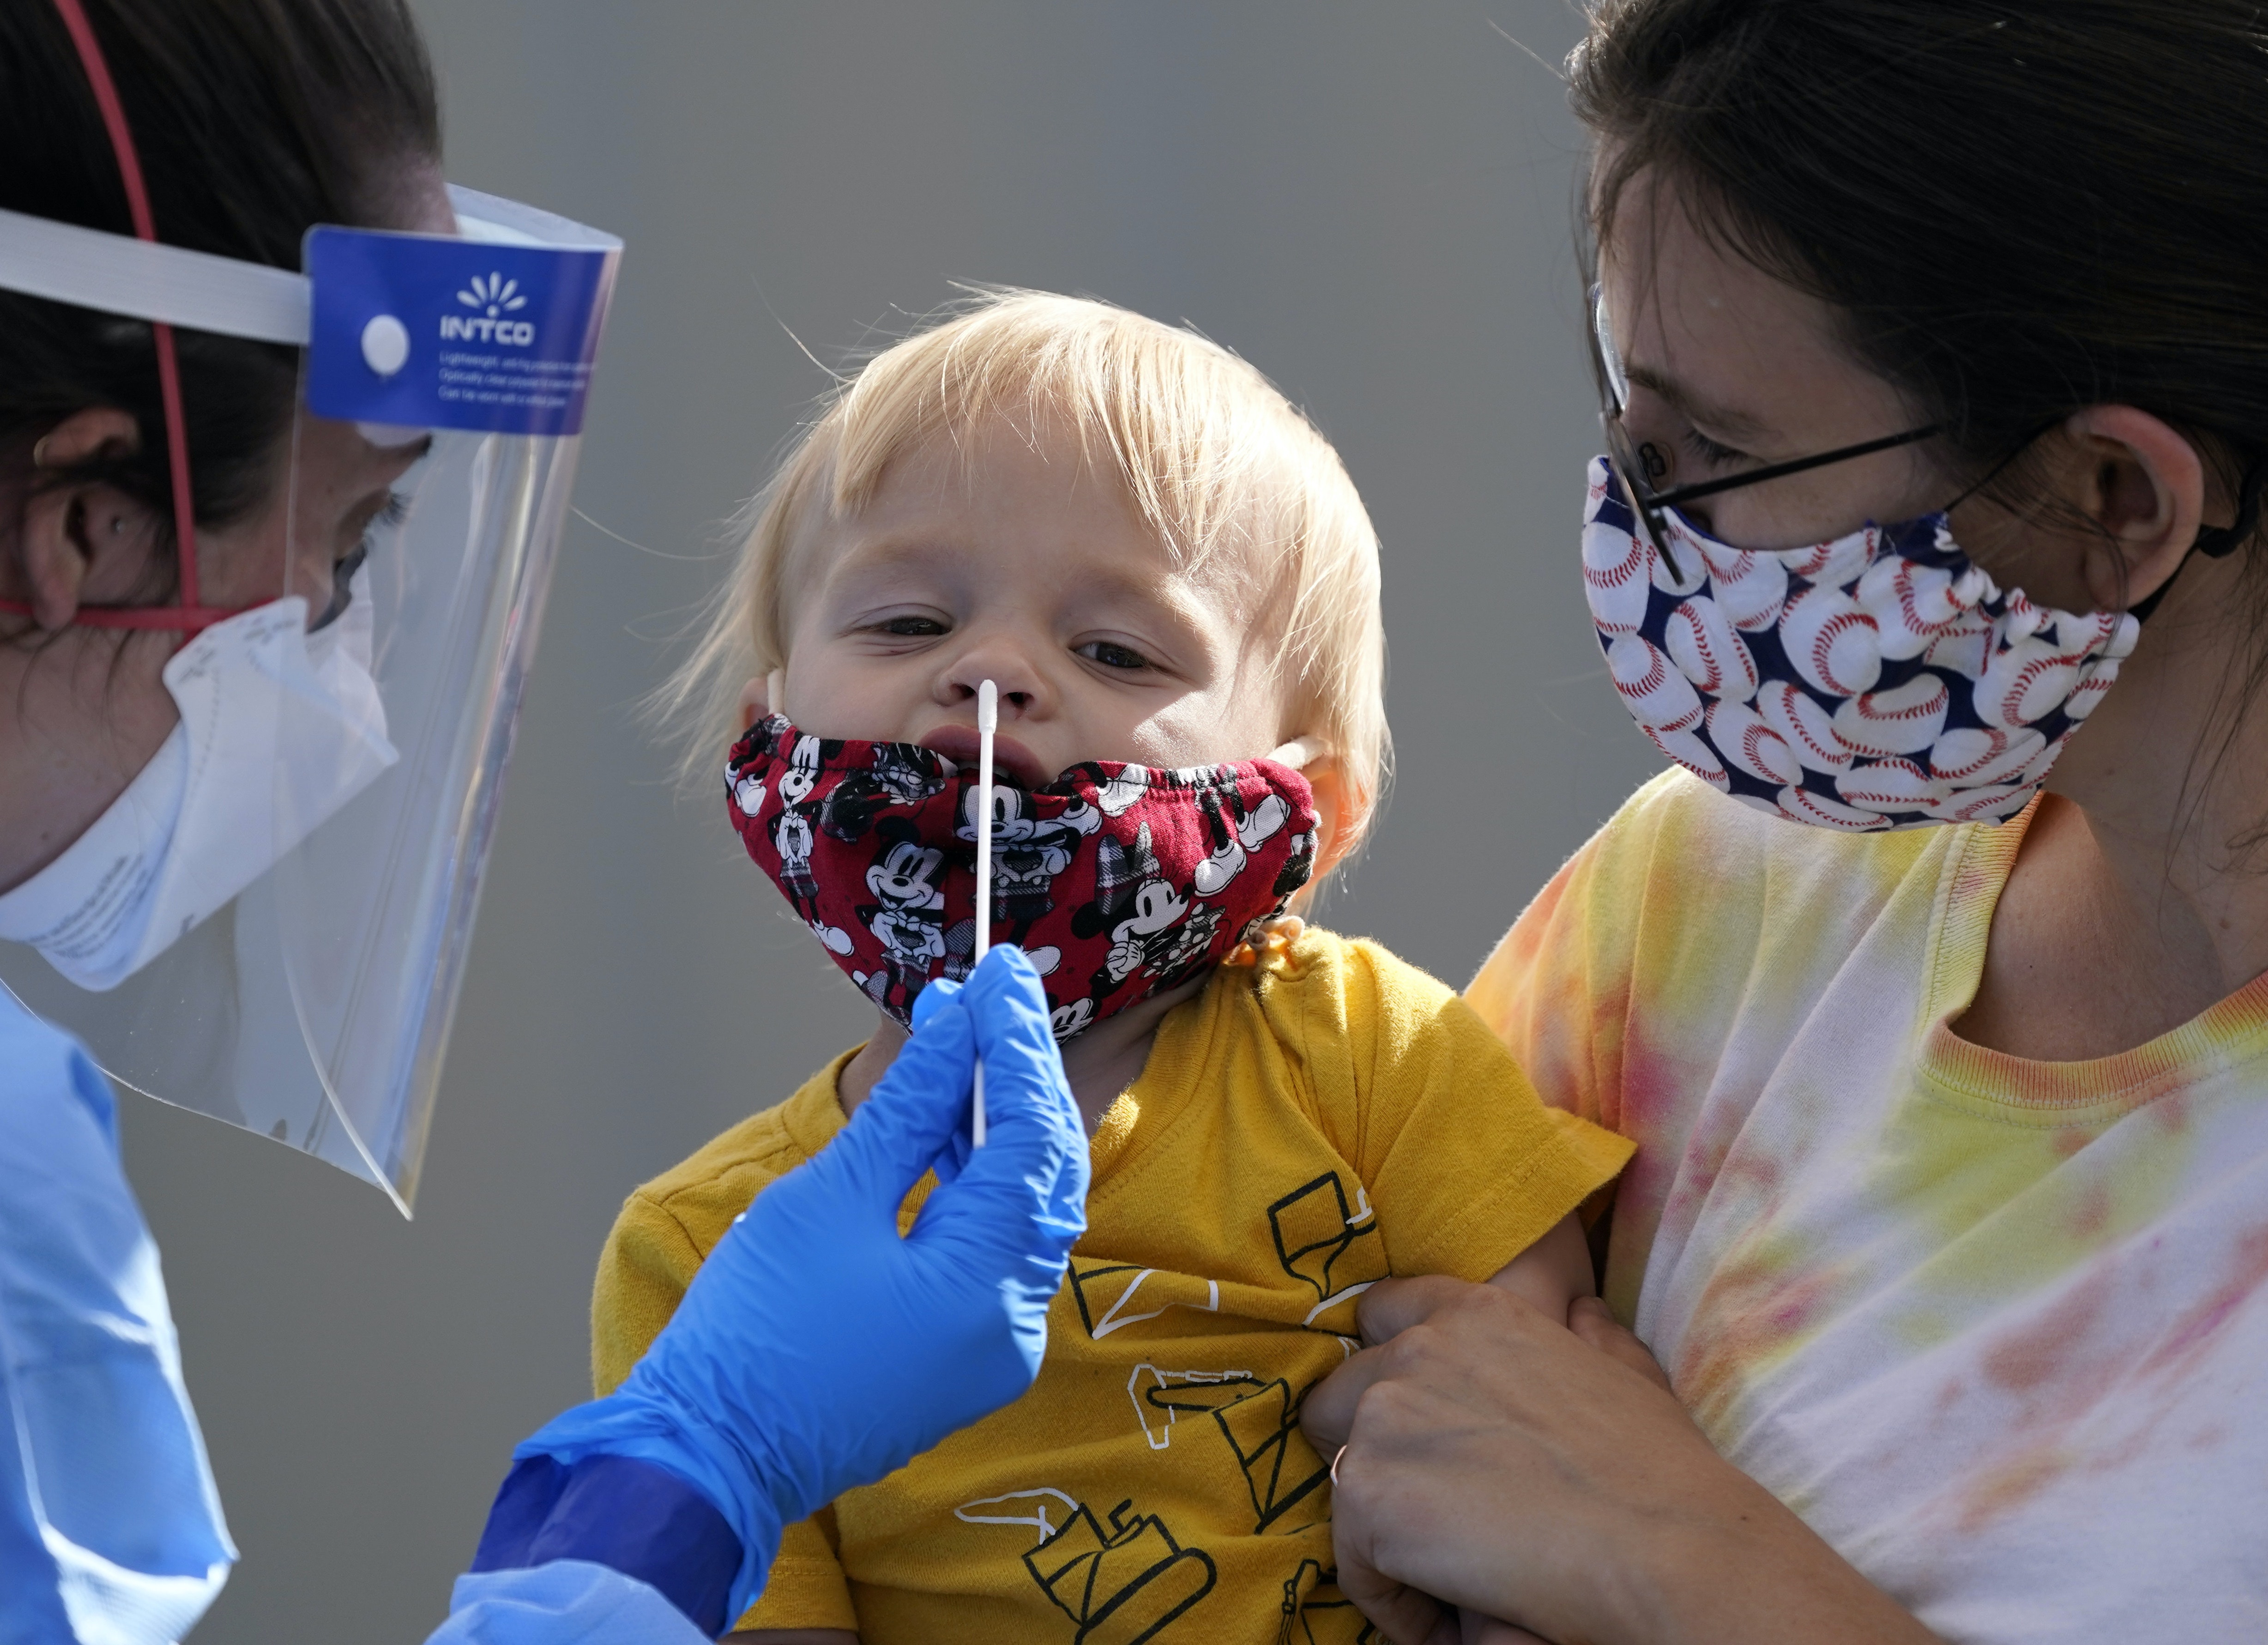 A very young child is nasal swabbed for coronavirus by a health professional in a mask and face shield